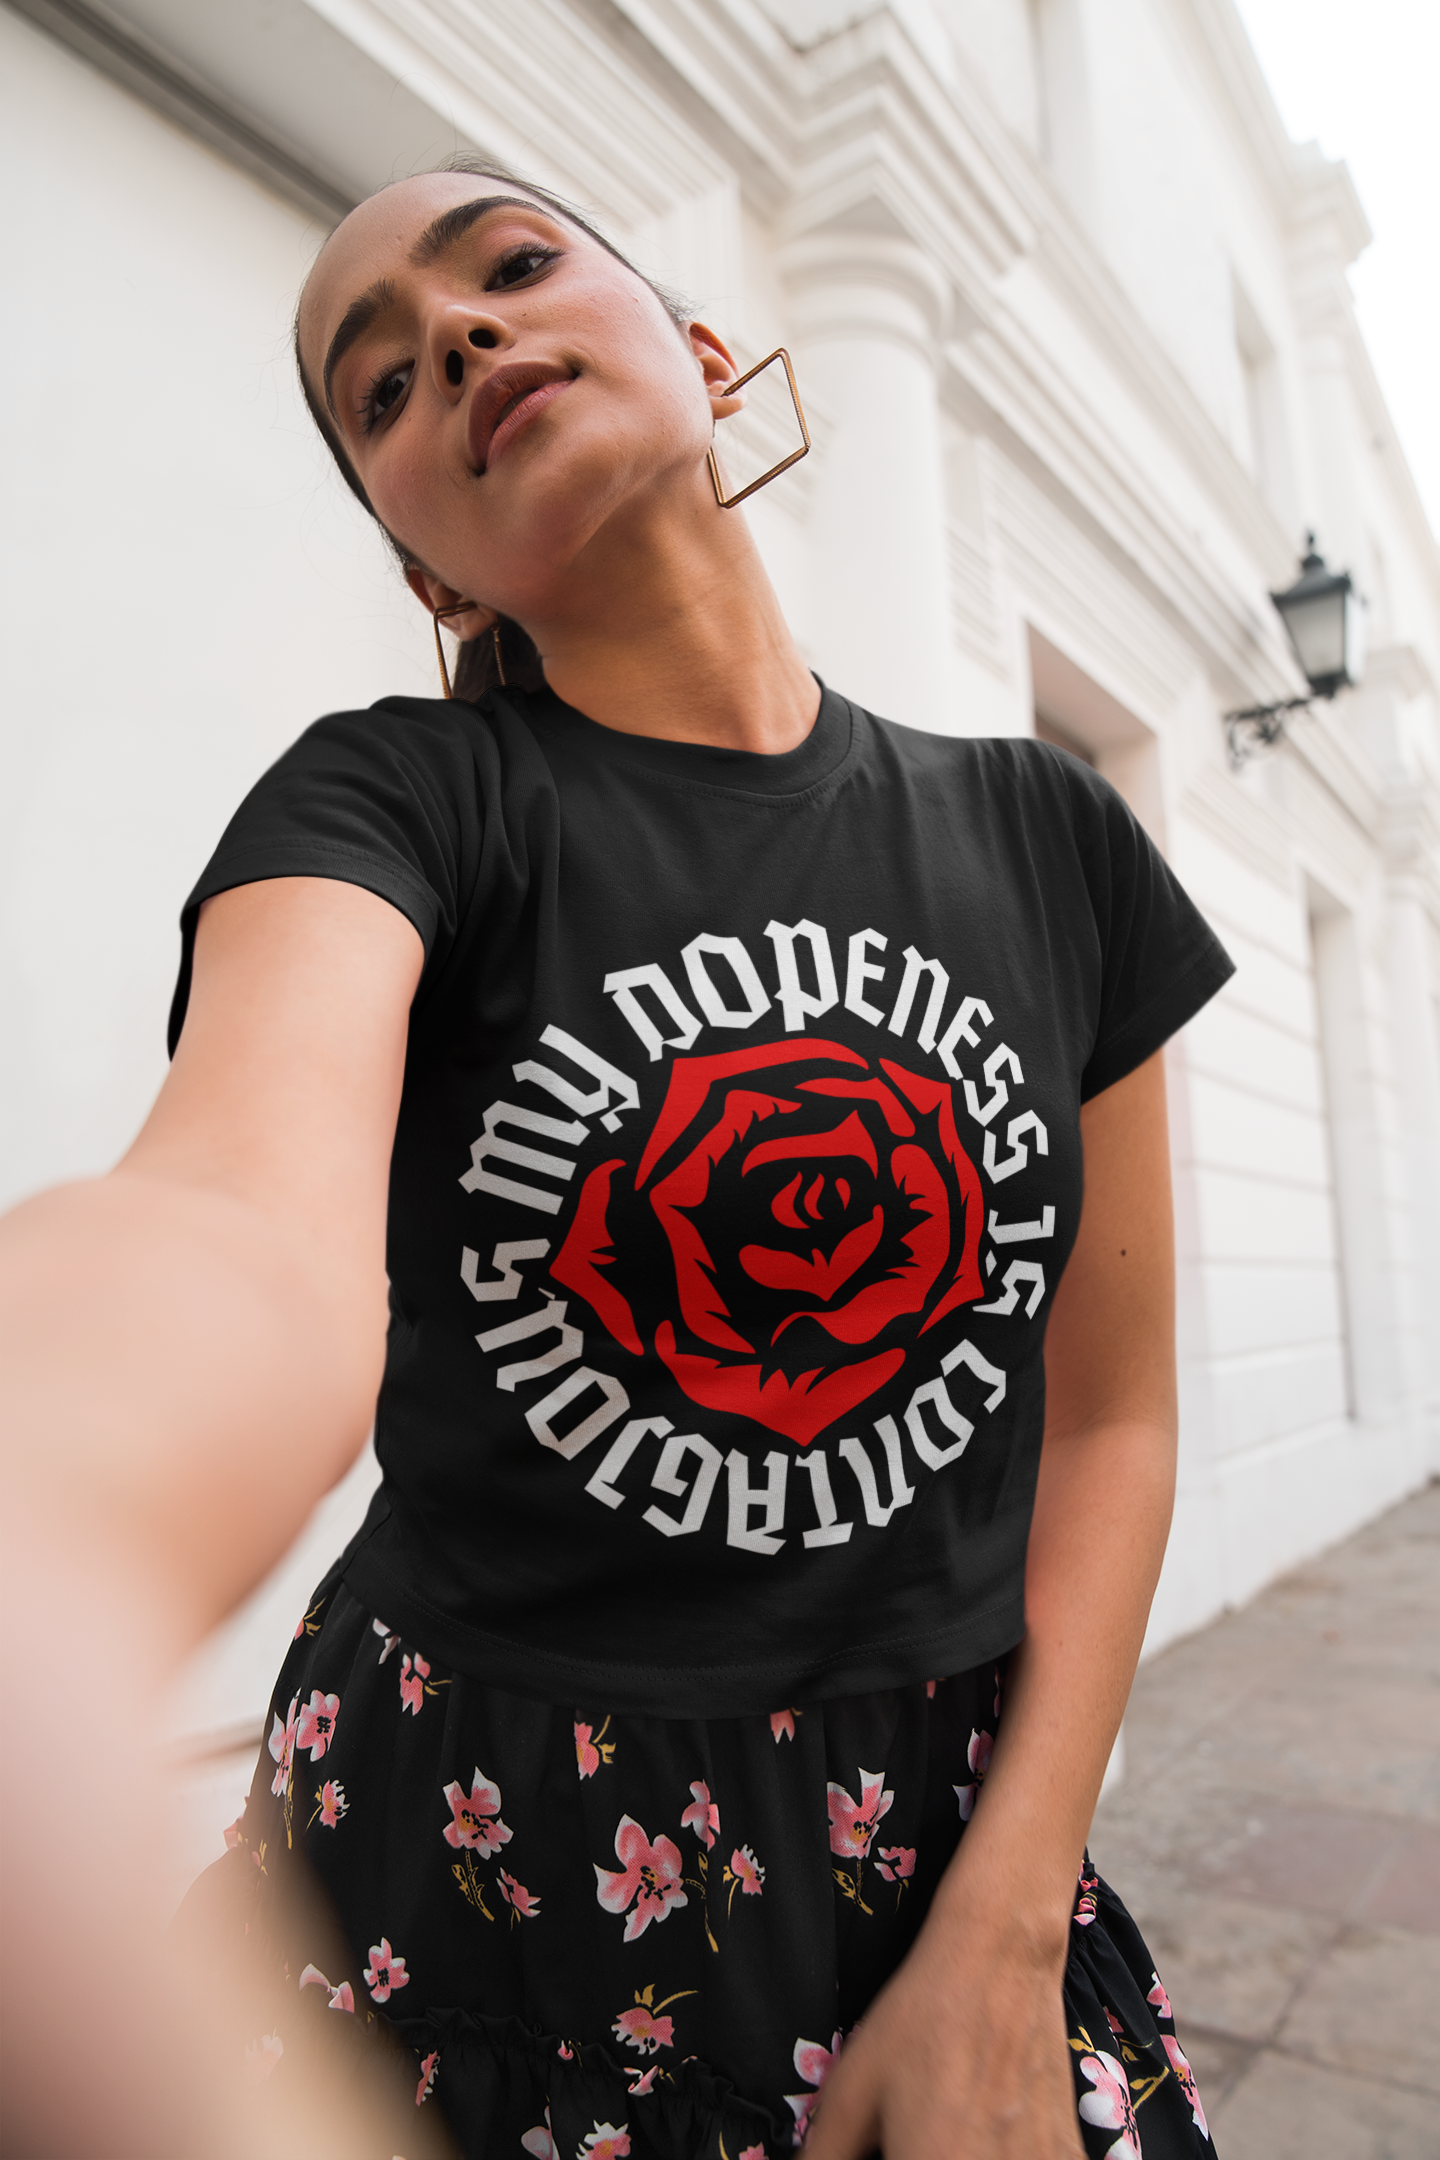 Cali Crop Top Tee - OL Roses White Text